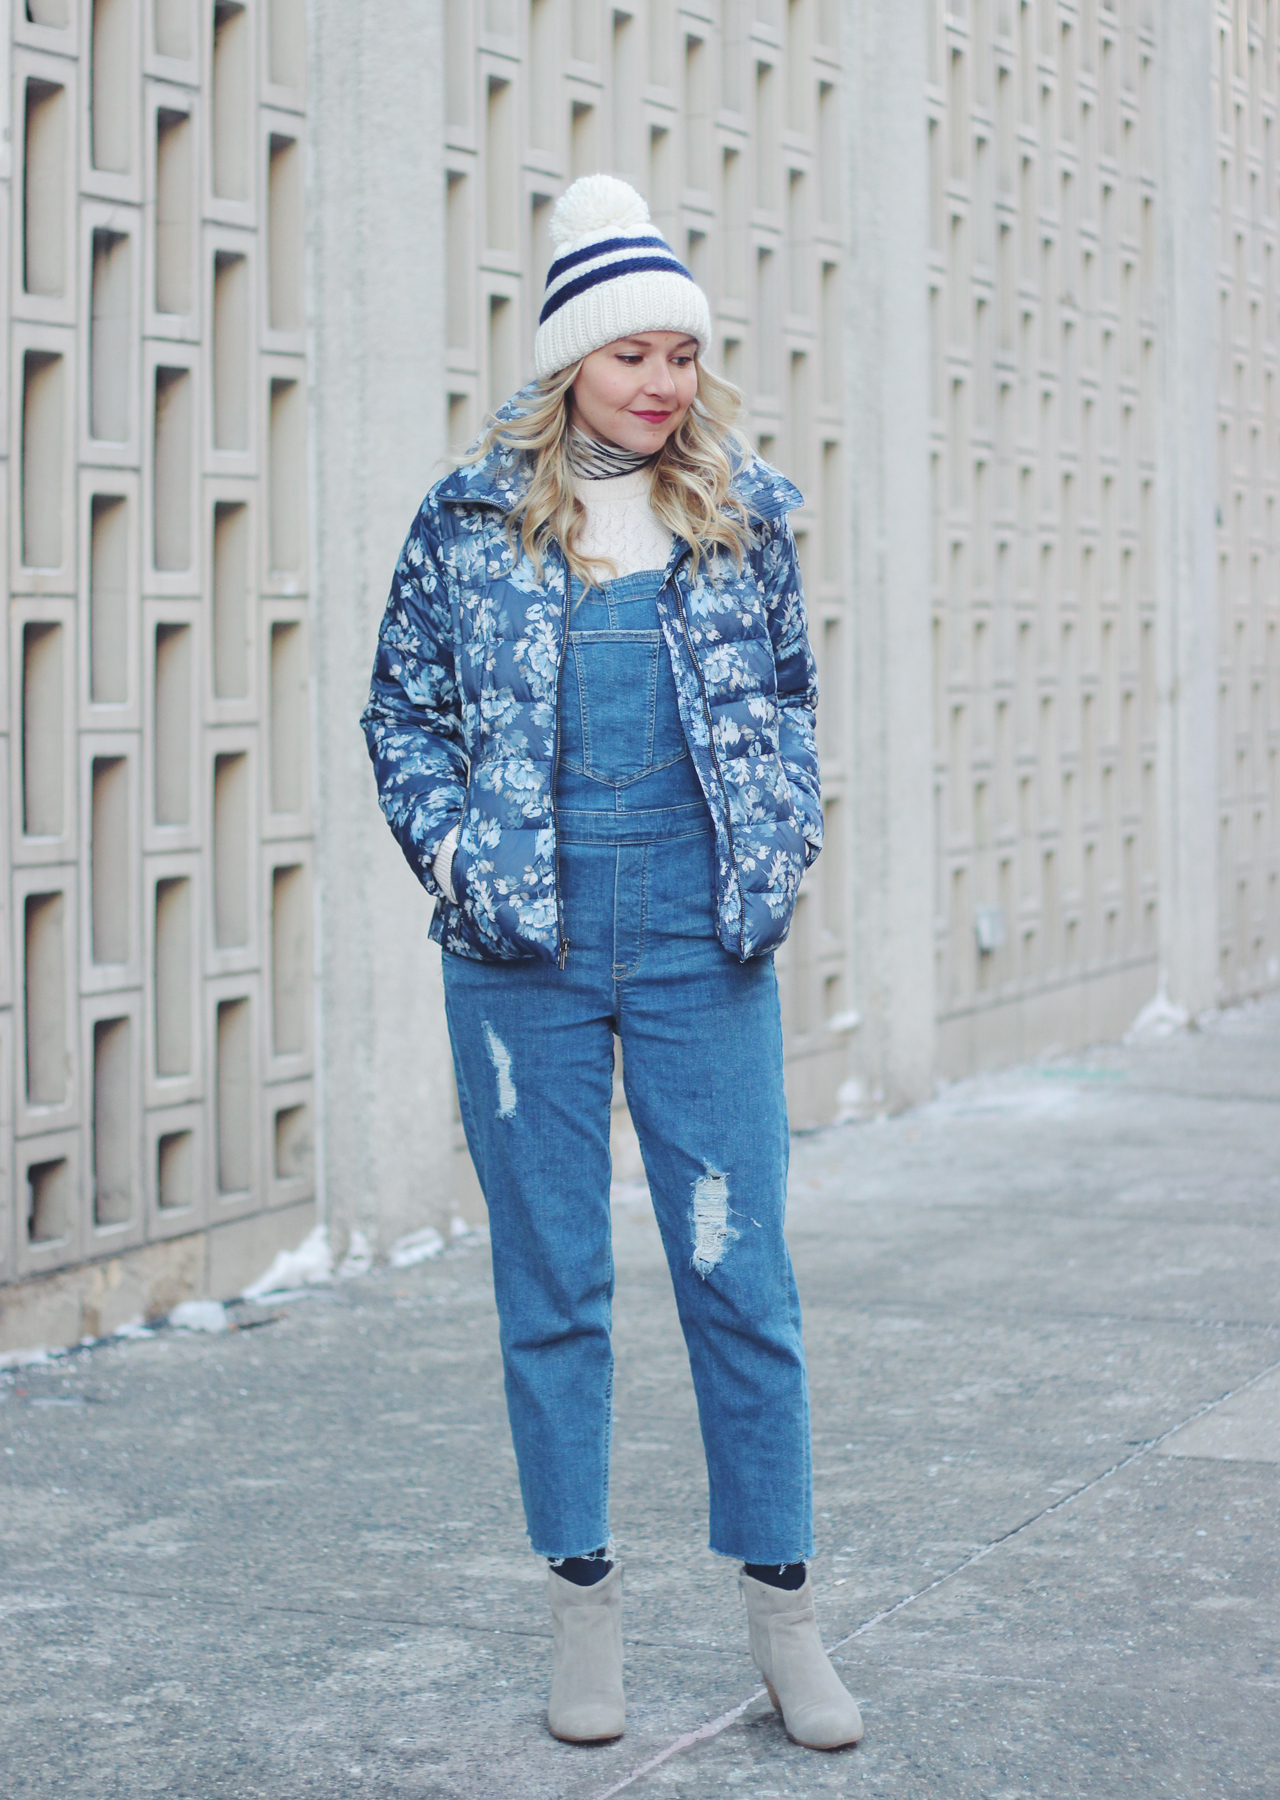 The Steele Maiden: Casual Winter Layers - Floral Puffer Jacket